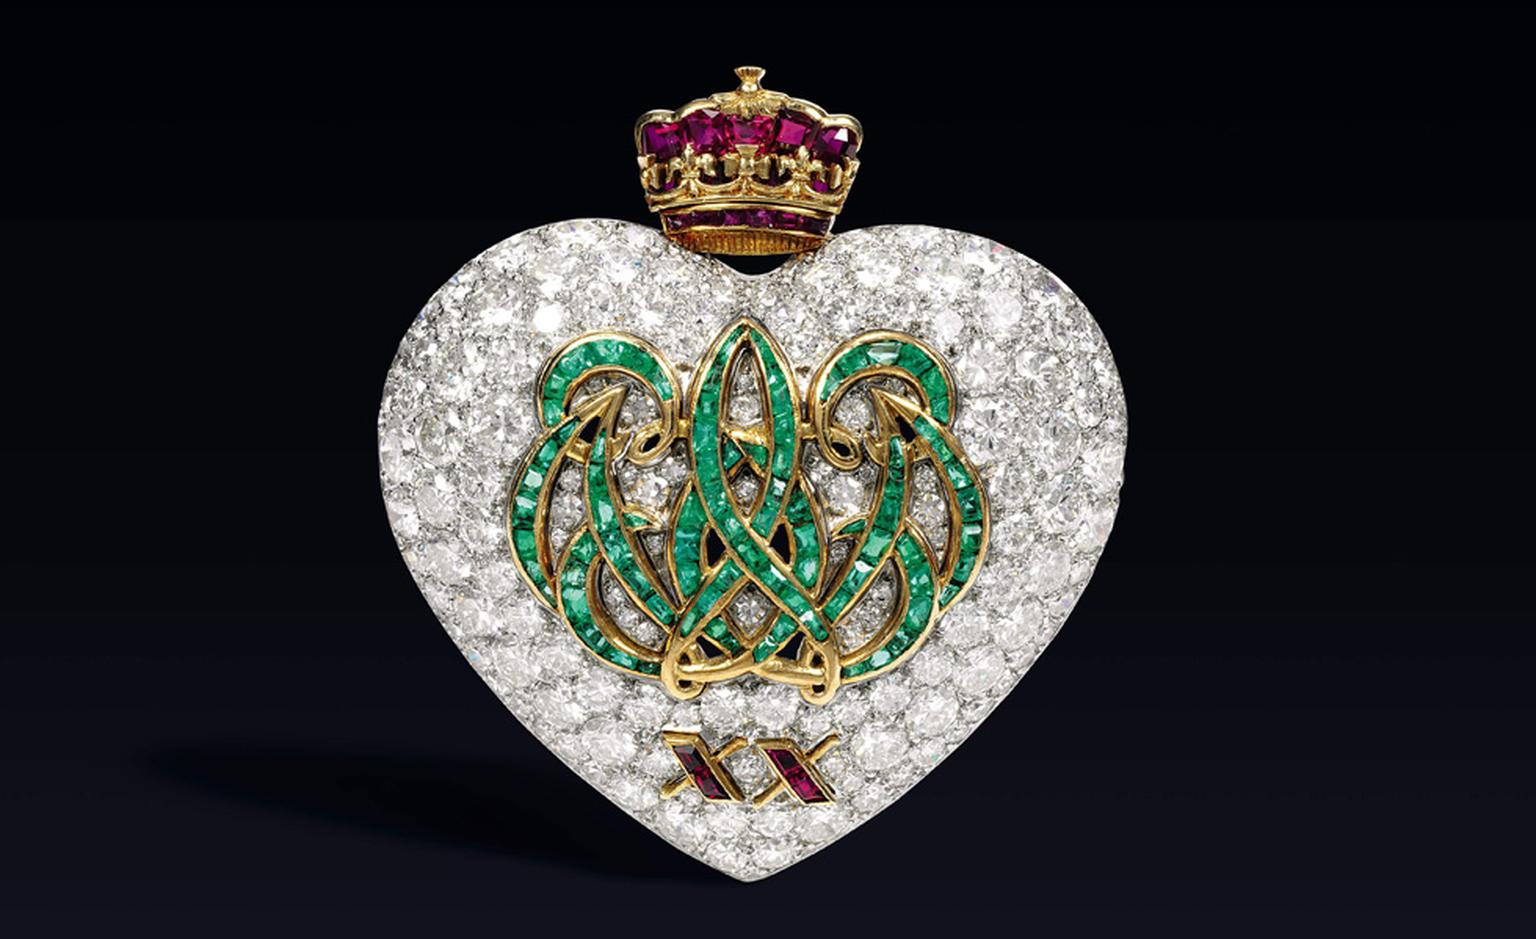 Sotheby's Lot 15 20th Anniversary brooch sold for £205,250